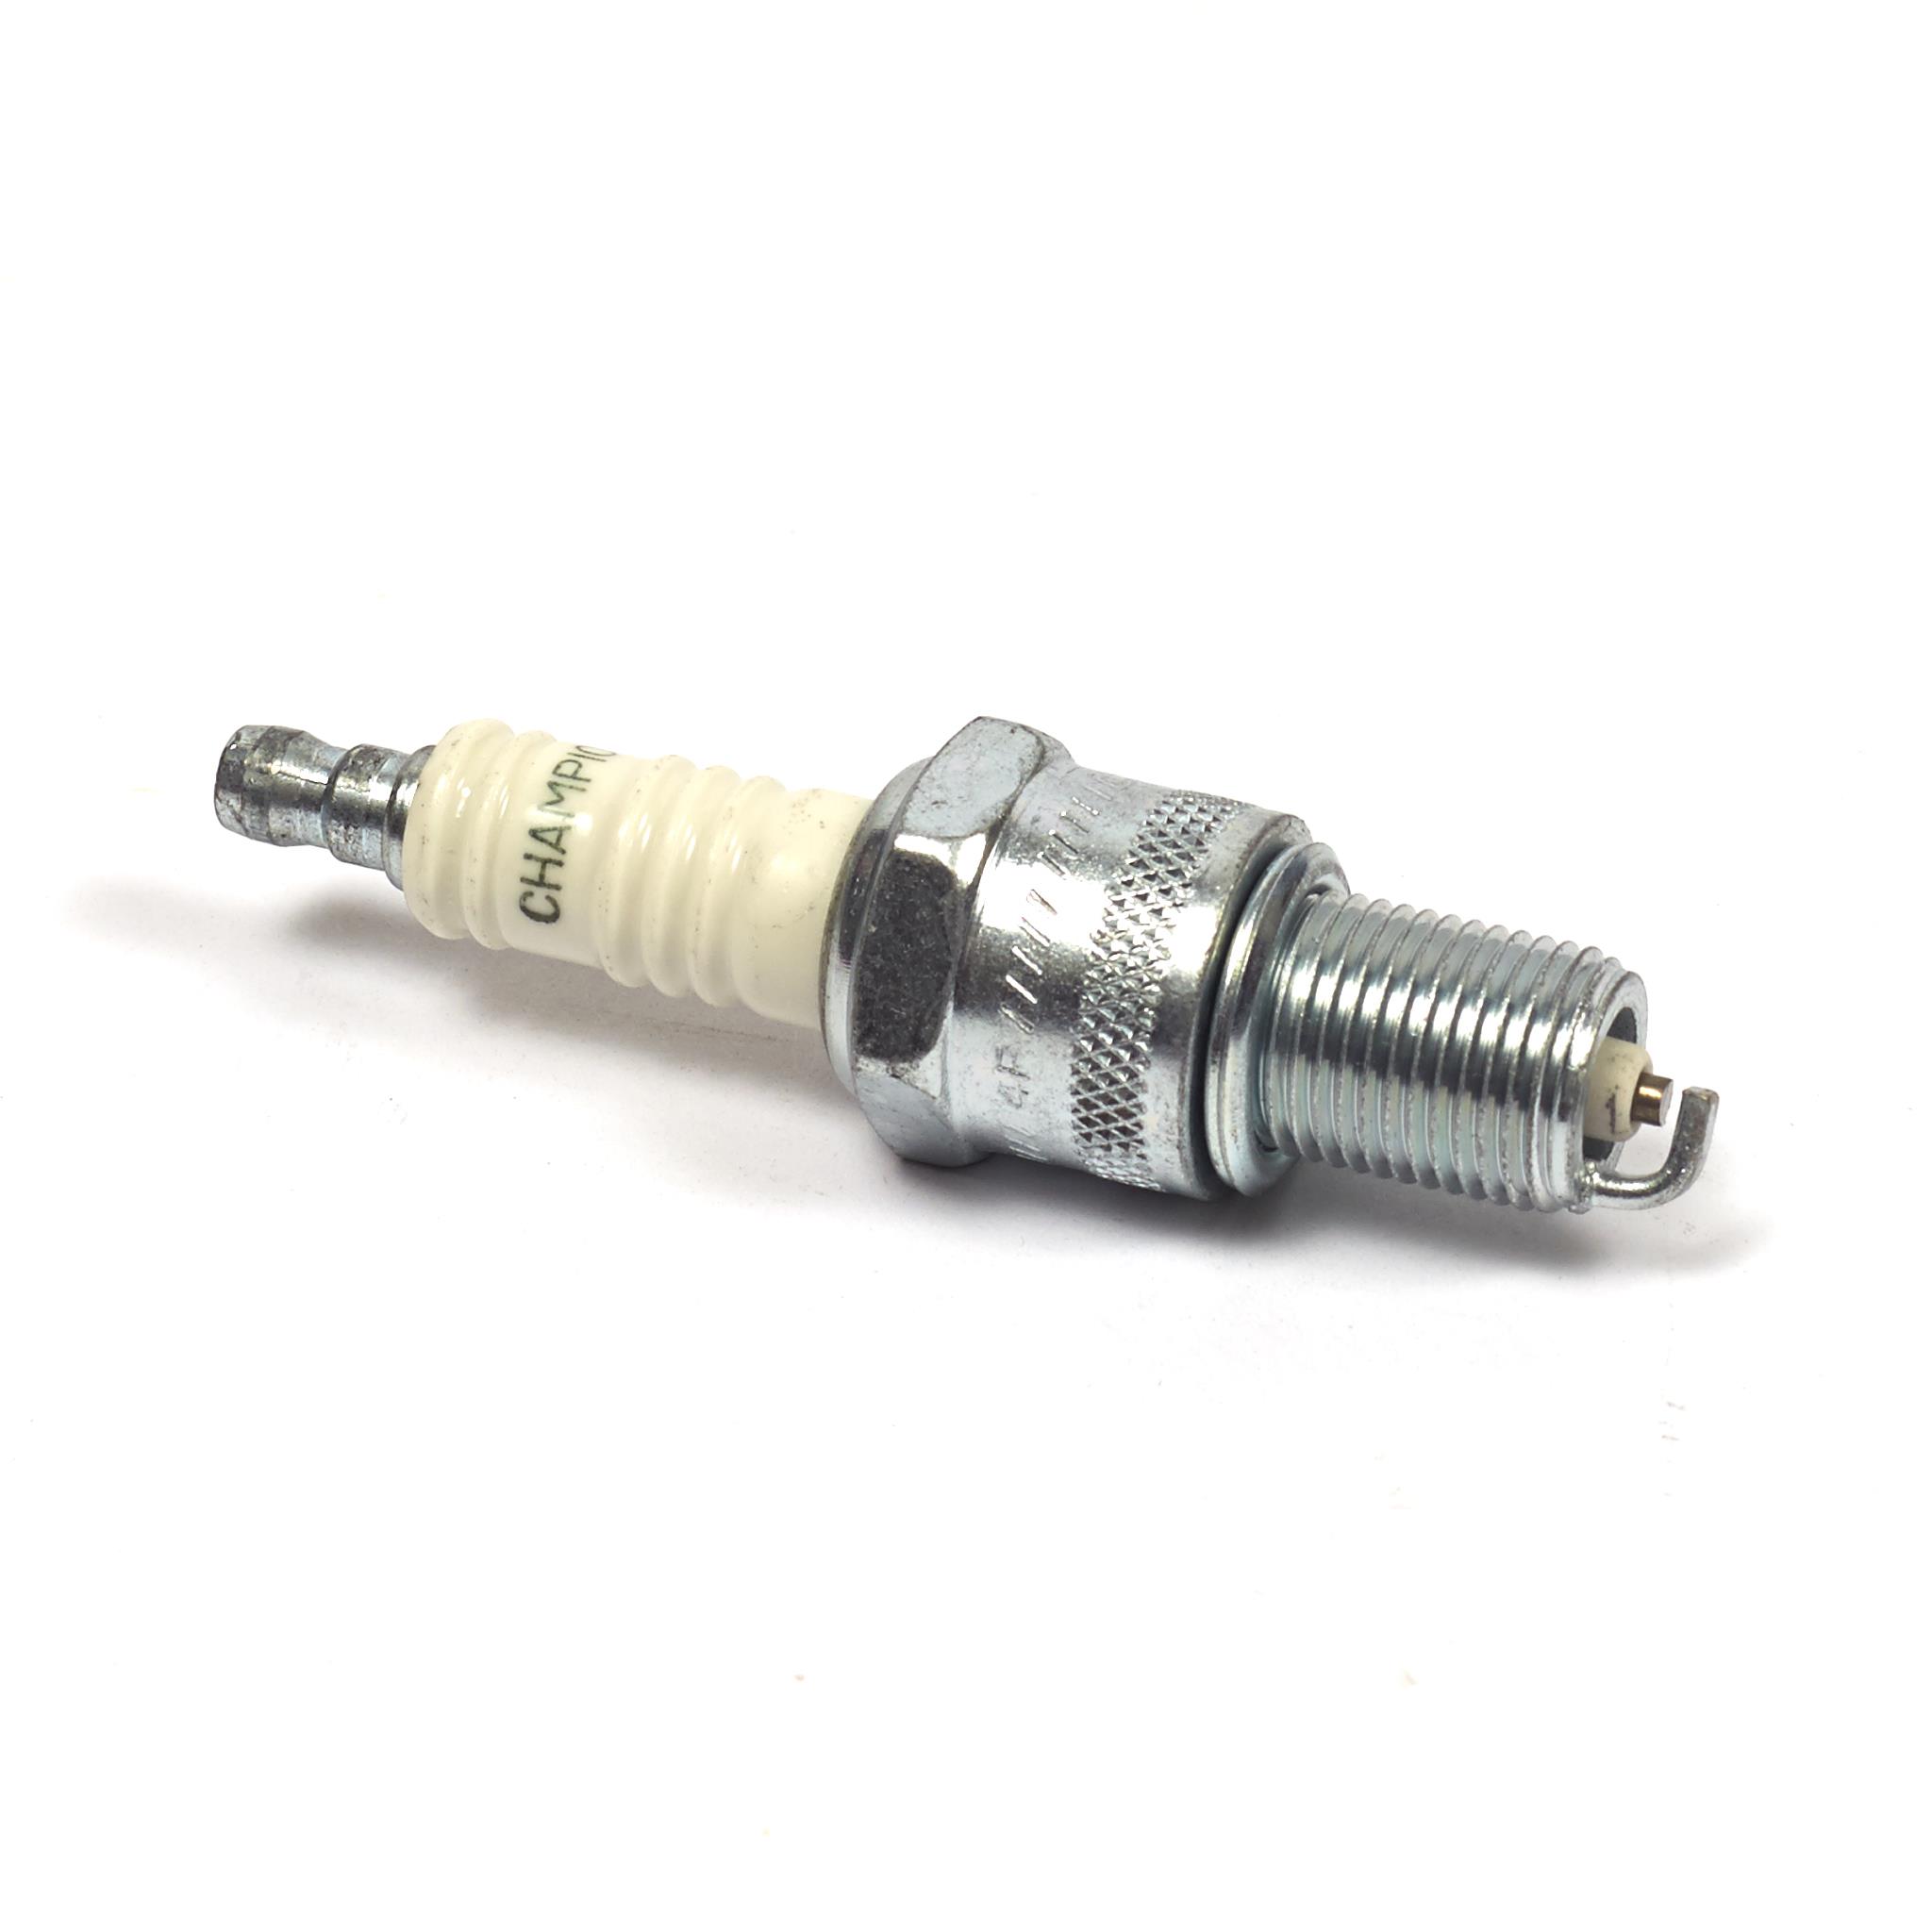 Are Aftermarket Spark Plugs Better?